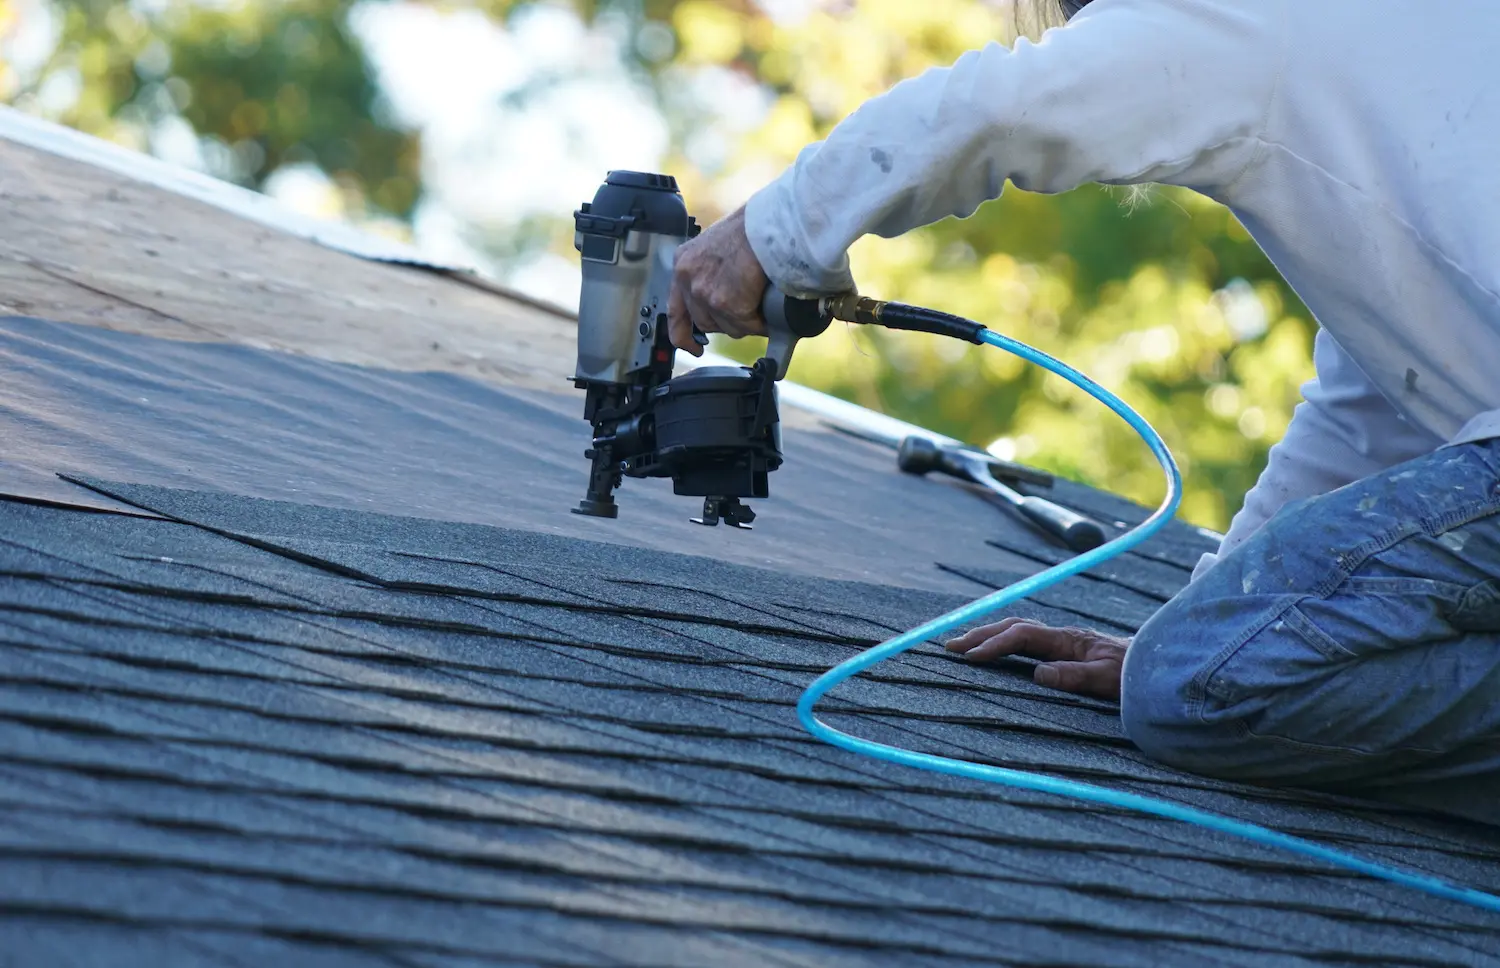 Roofing Pros Georgia - Residential Roofing